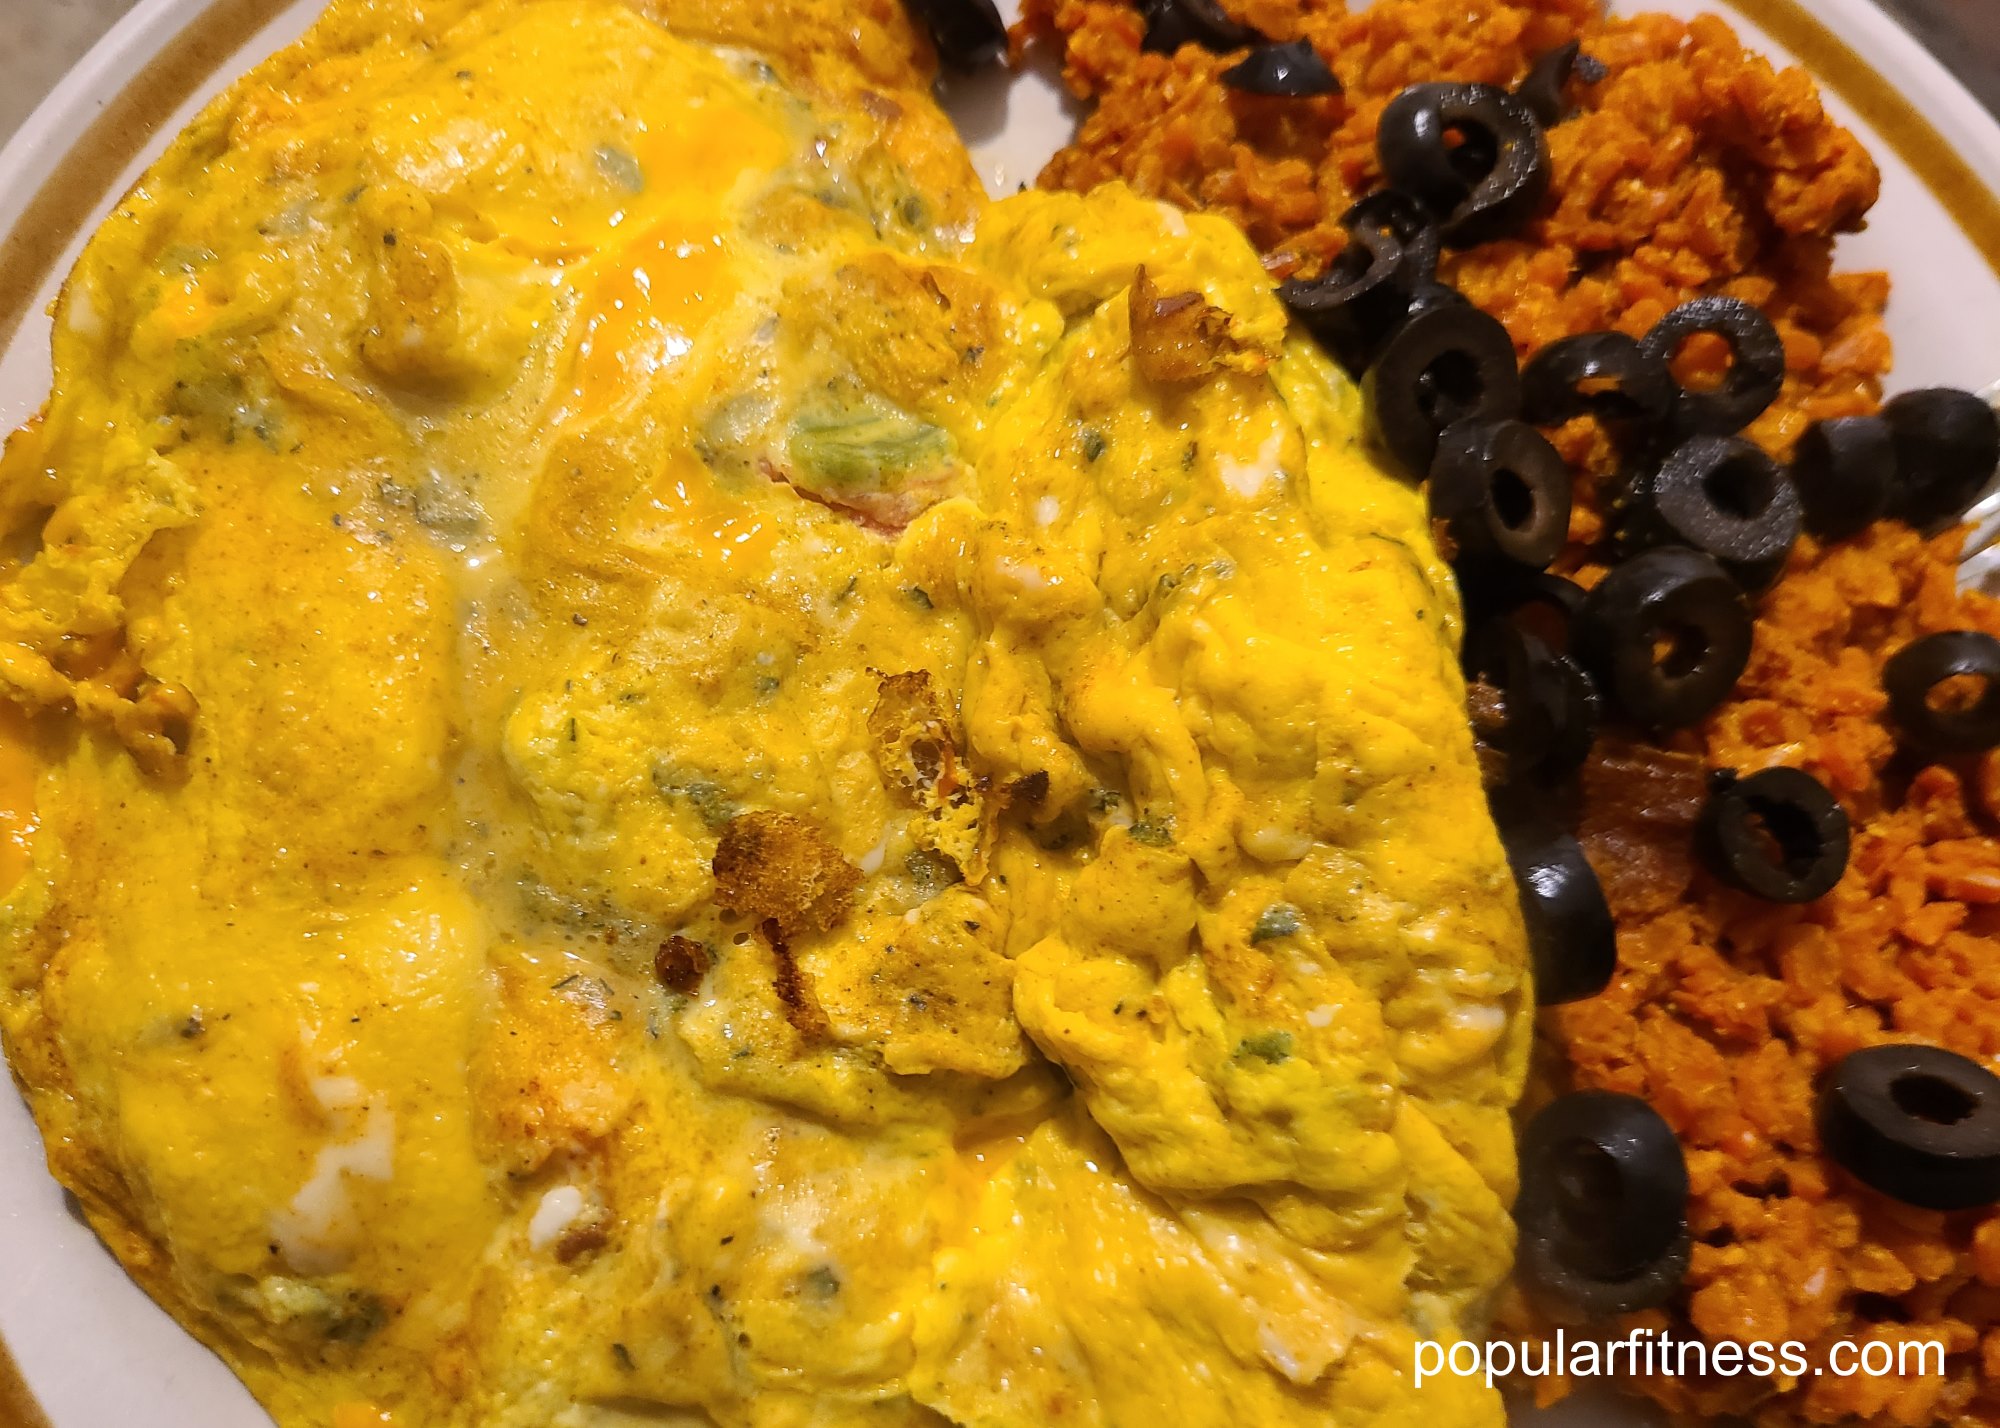 Delicious and nutritious fluffy omelette for dinner - Photo by popular fitness